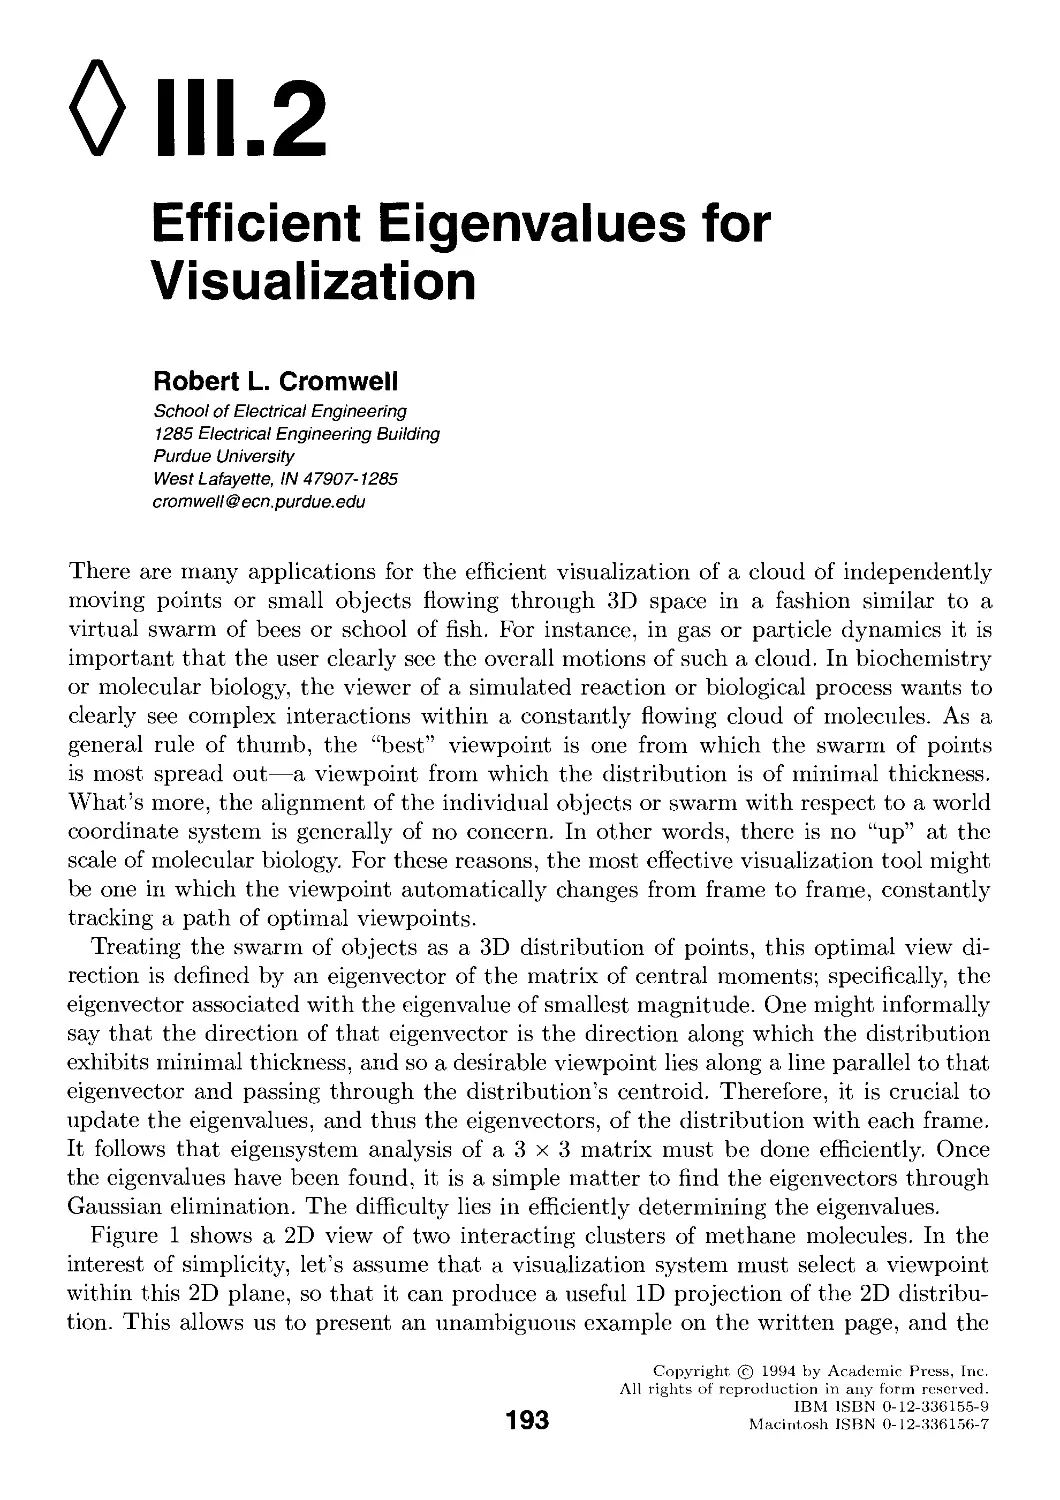 III.2. Efficient Eigenvalues for Visualization by Robert L. Cromwell